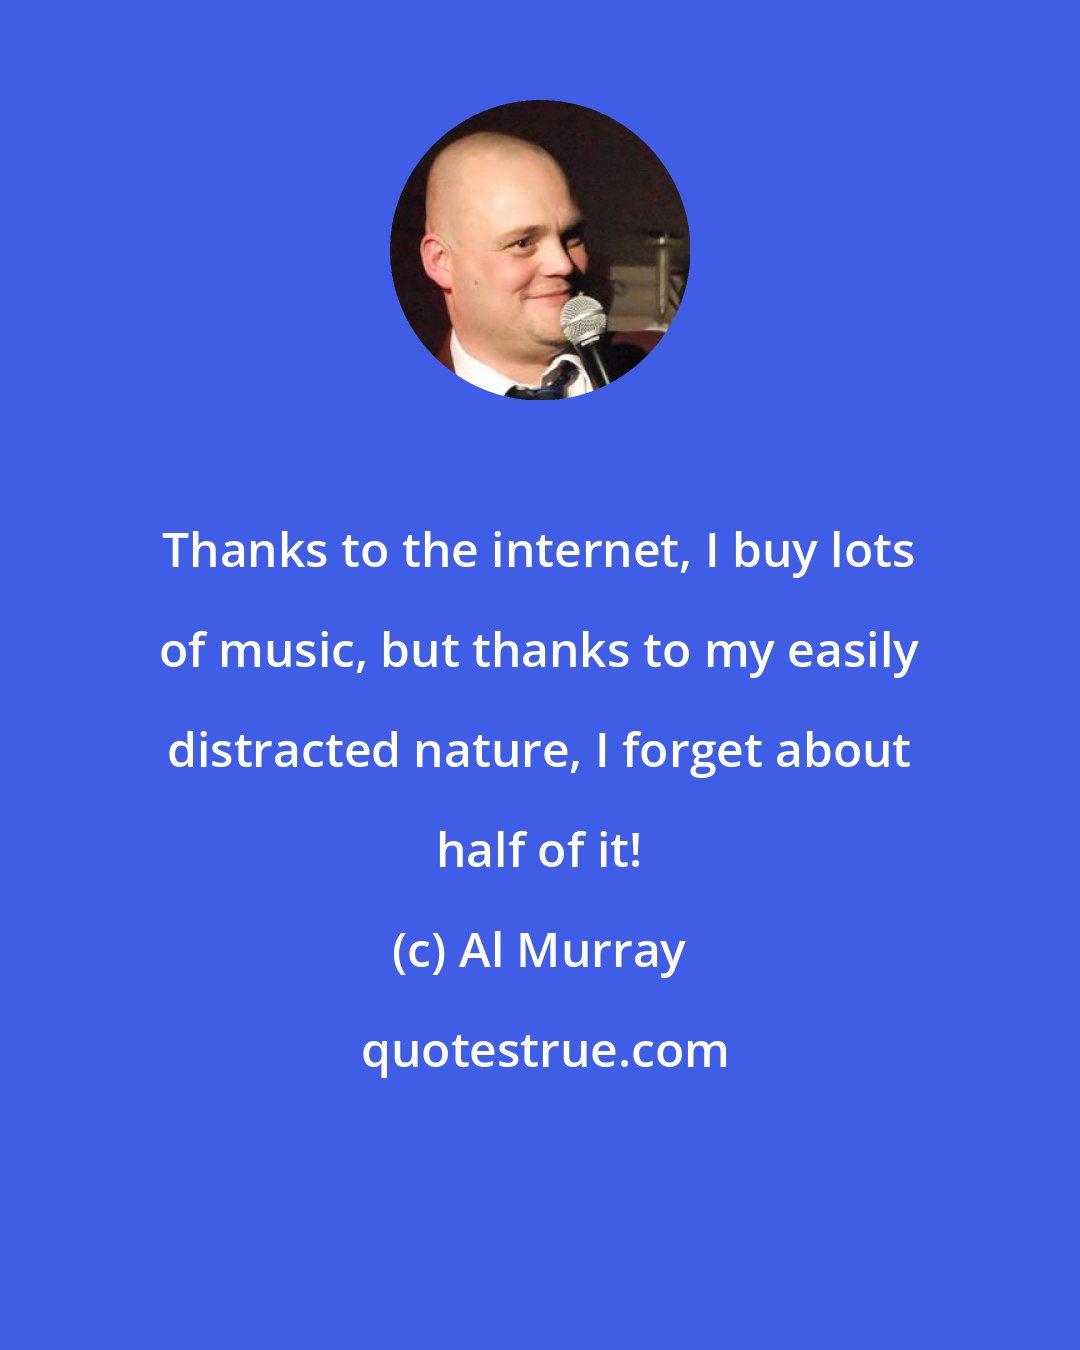 Al Murray: Thanks to the internet, I buy lots of music, but thanks to my easily distracted nature, I forget about half of it!